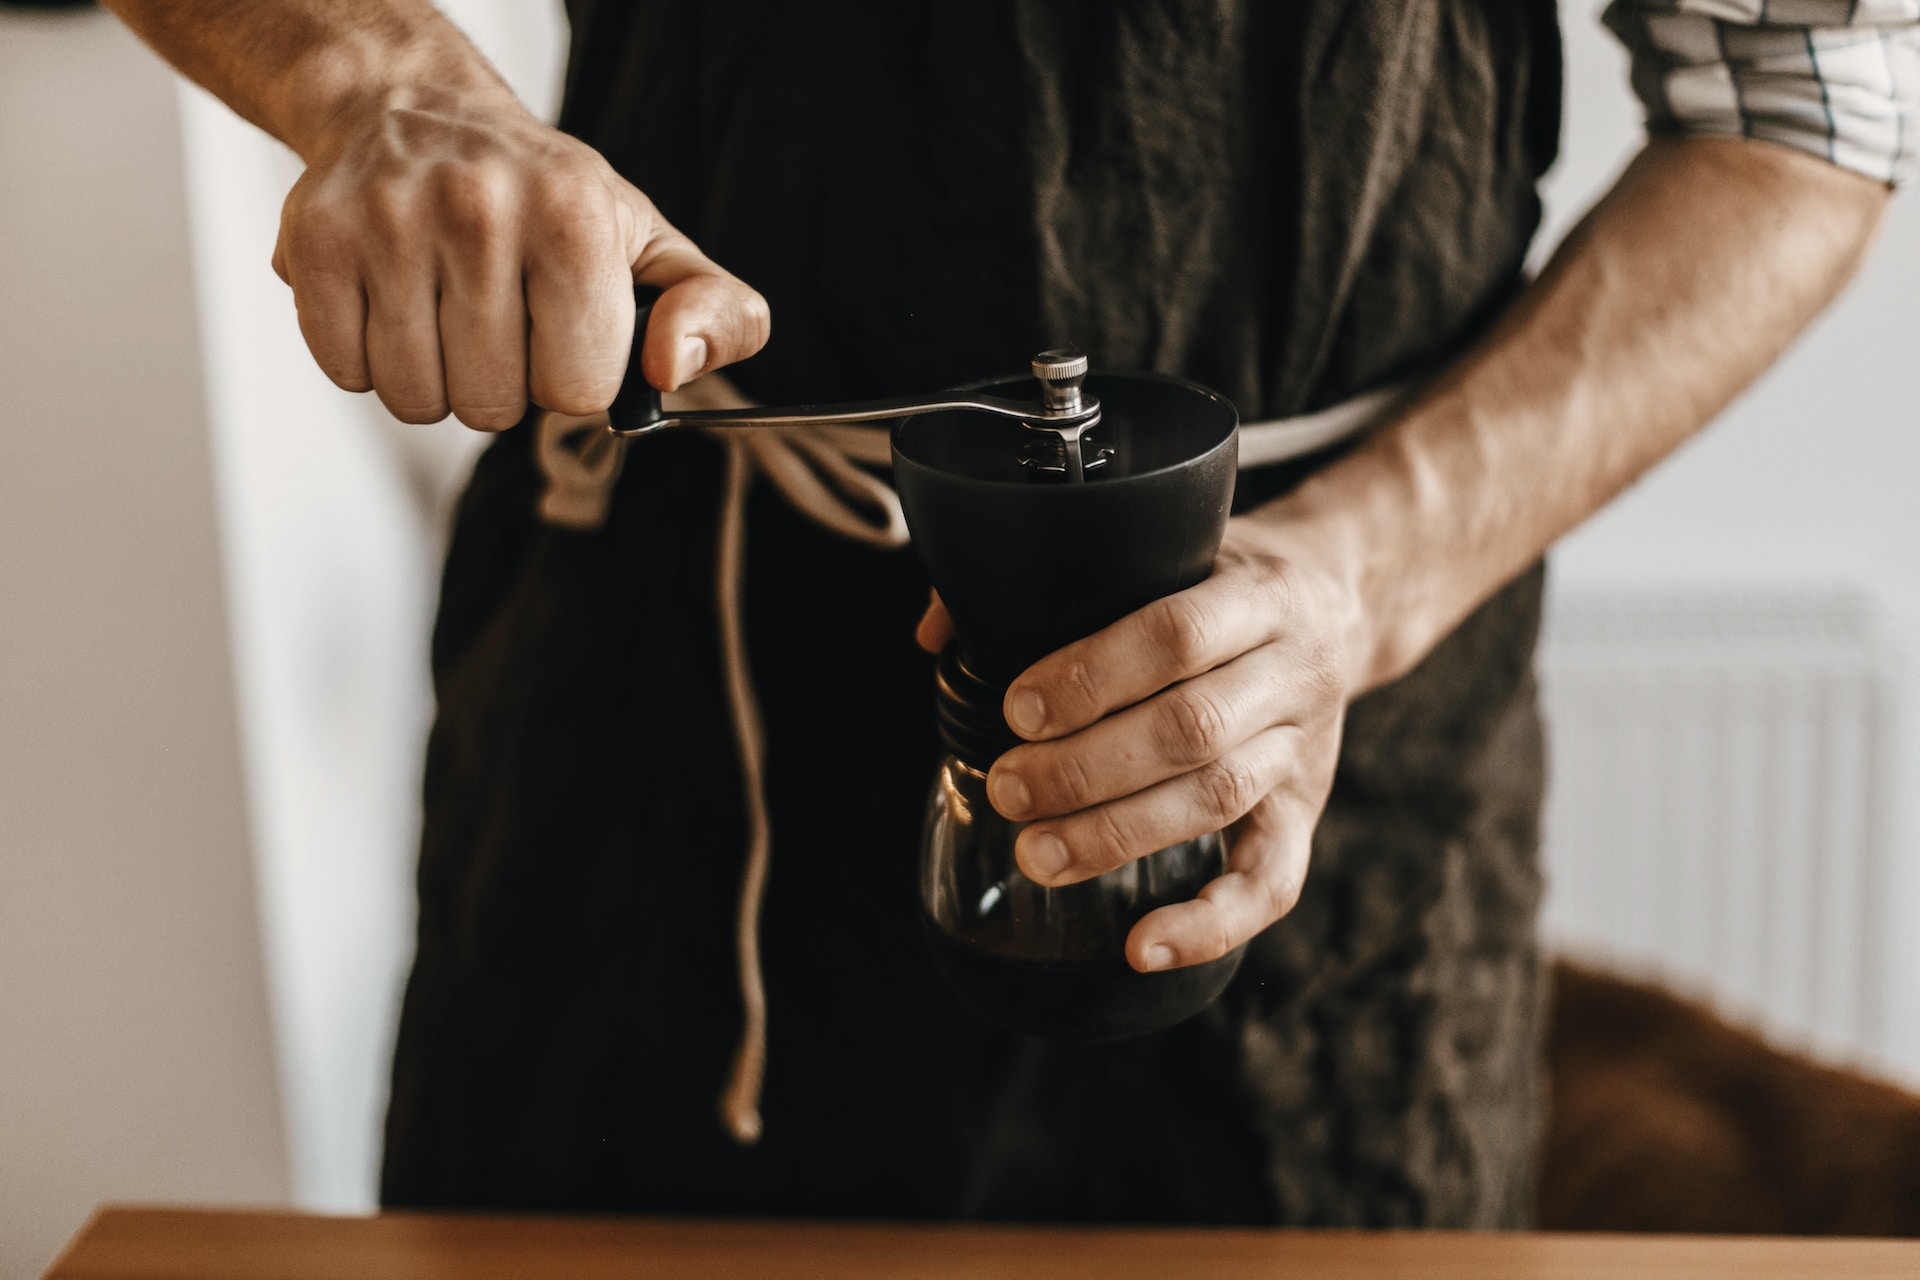 A man twists the top of a black manual coffee grinder